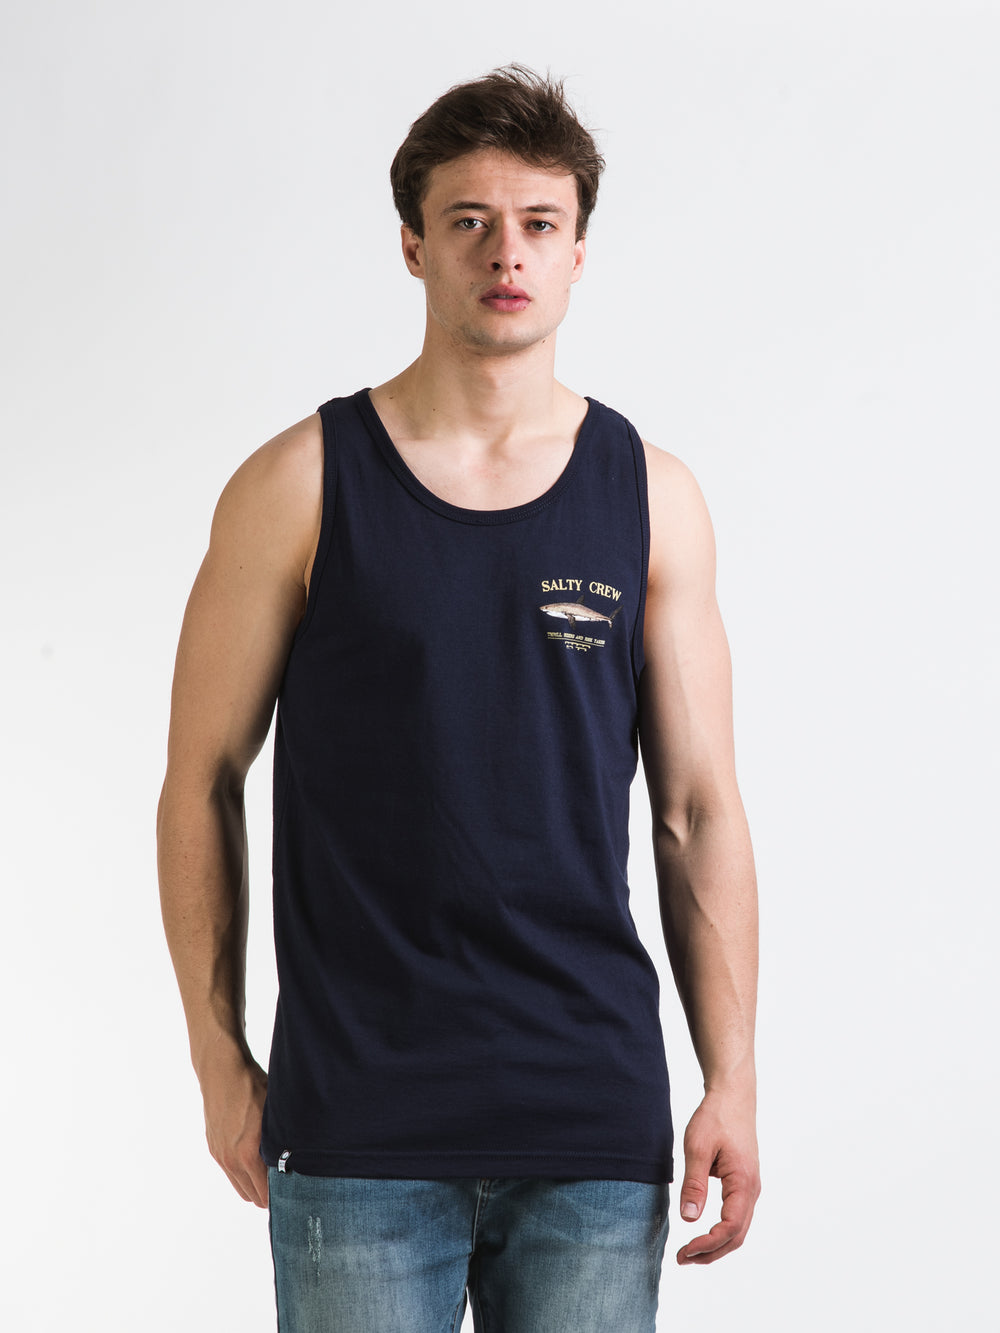 SALTY CREW BRUCE Tank Top - CLEARANCE